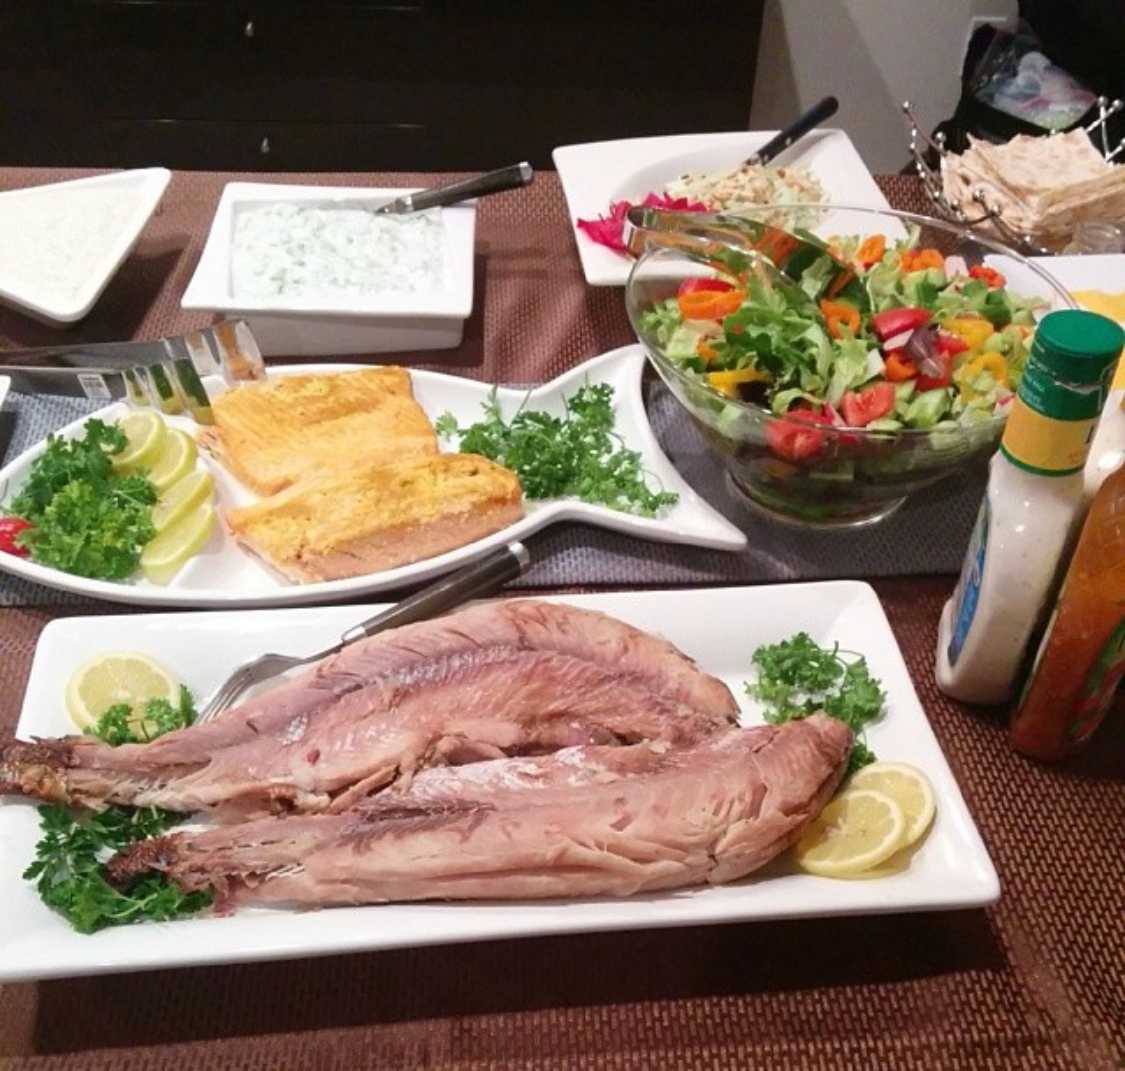 A table set with dishes, such as zook, that are eaten during Armenian Christmas dinner . Photo credit: Karin Abcarians